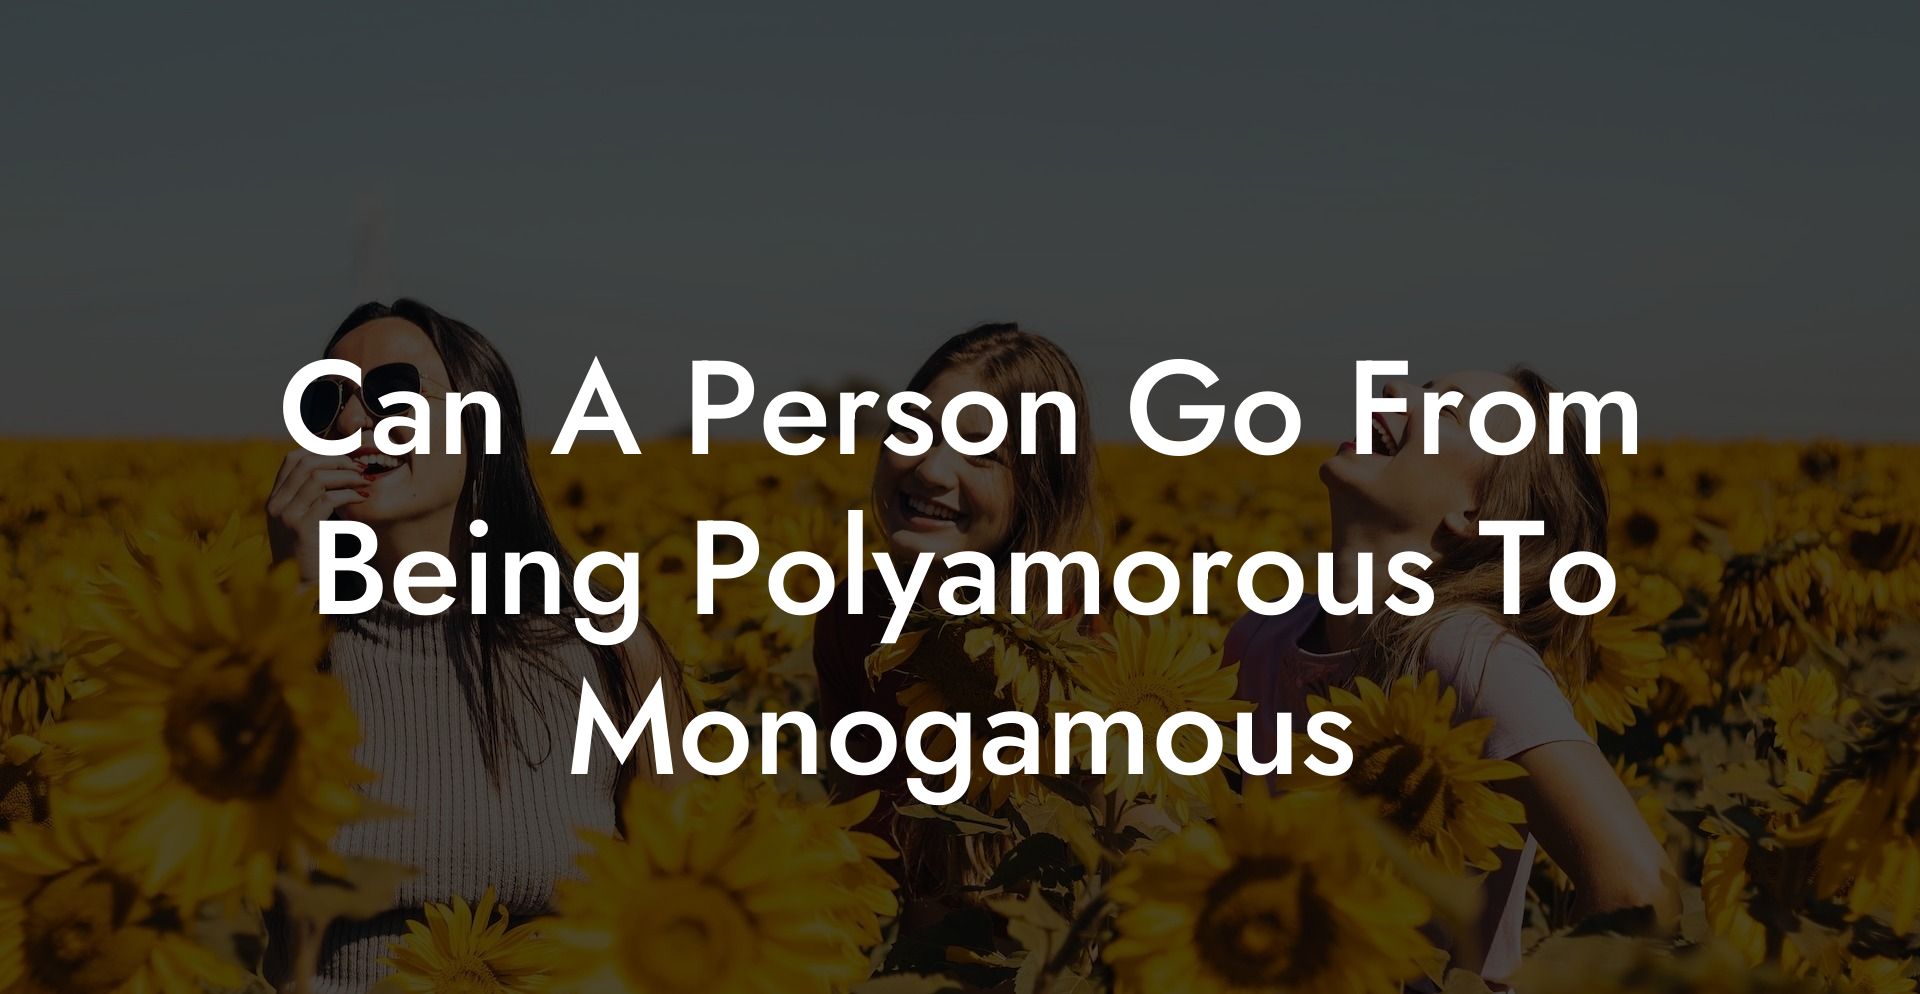 Can A Person Go From Being Polyamorous To Monogamous